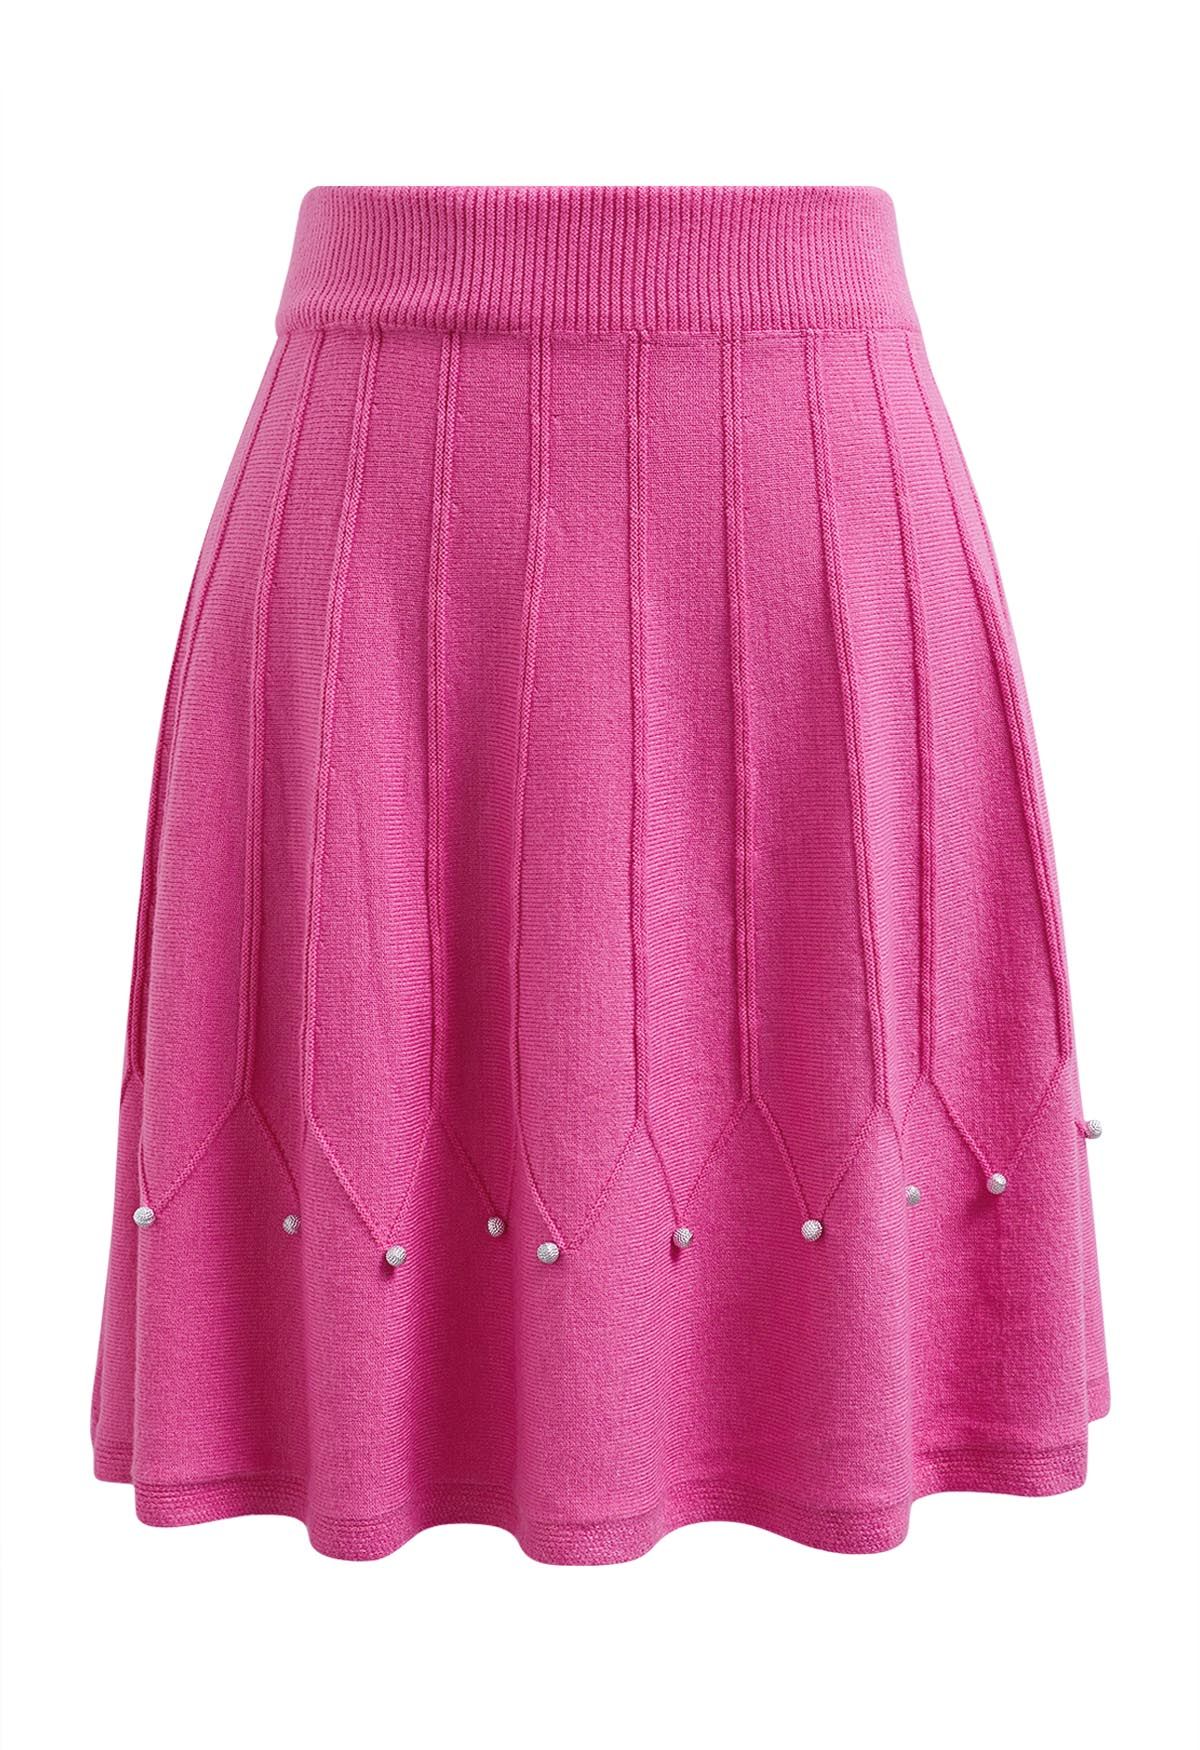 Silver Bead Embellished Seam Knit Skirt in Magenta